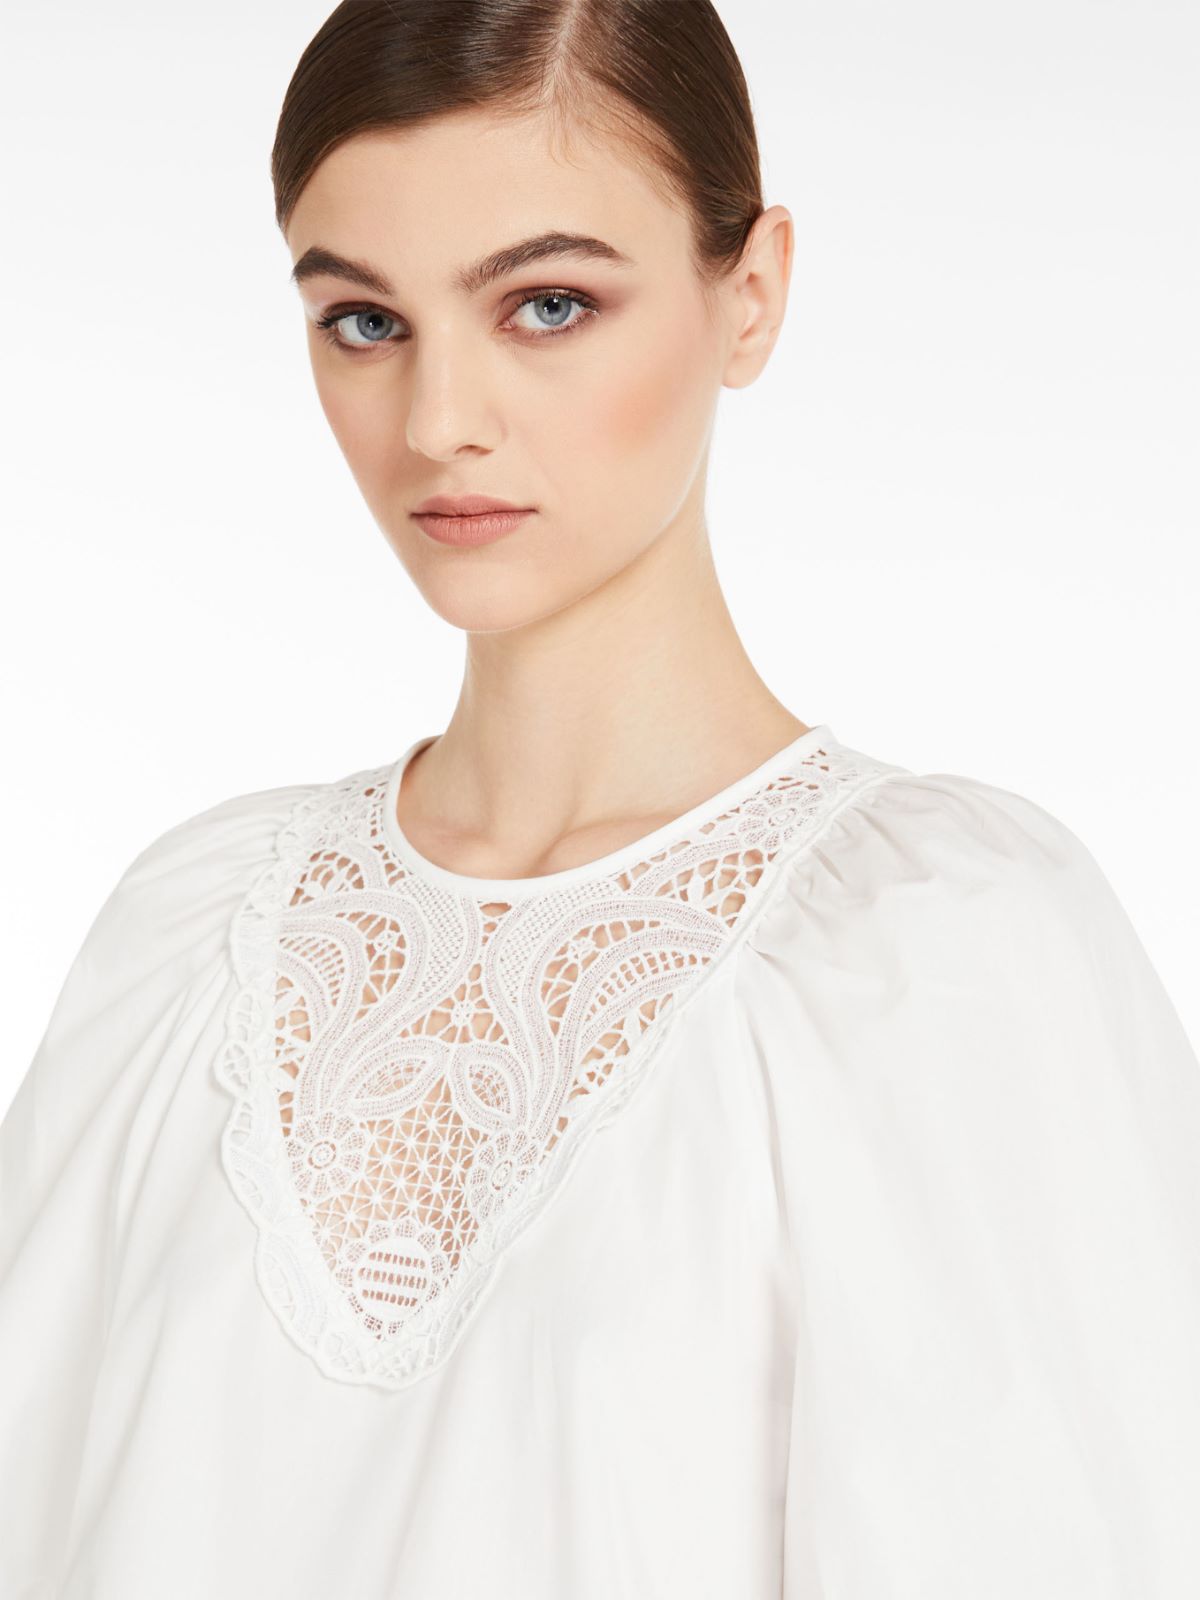 Poplin blouse with embroidery - OPTICAL WHITE - Weekend Max Mara - 5